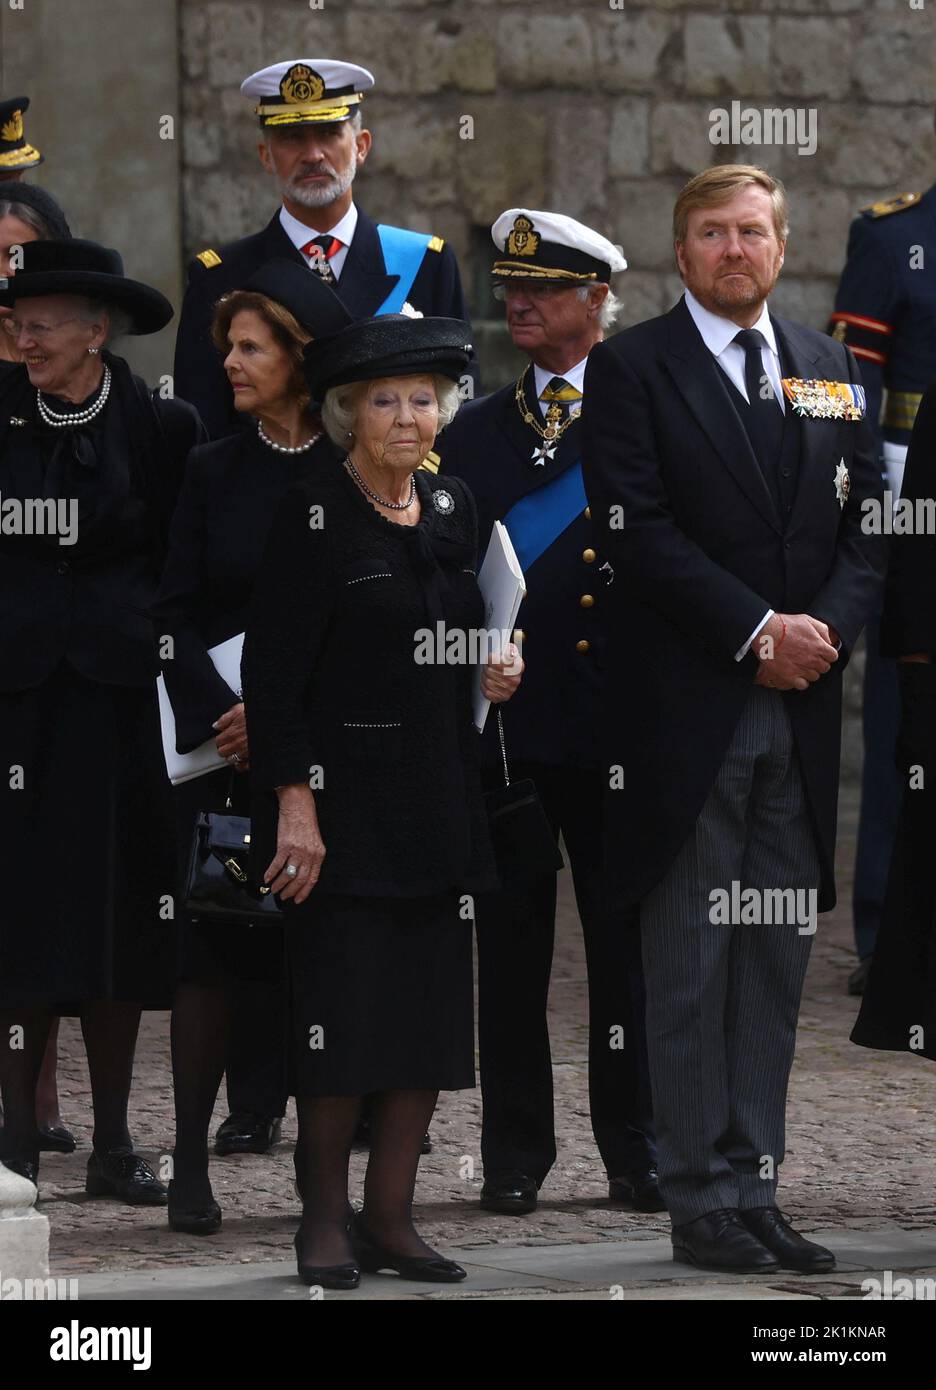 The Netherlands' King Willem-Alexander and Princess Beatrix attend the state funeral and burial of Britain's Queen Elizabeth at Westminster Abbey, in London, Britain, September 19, 2022.  REUTERS/Kai Pfaffenbach Stock Photo